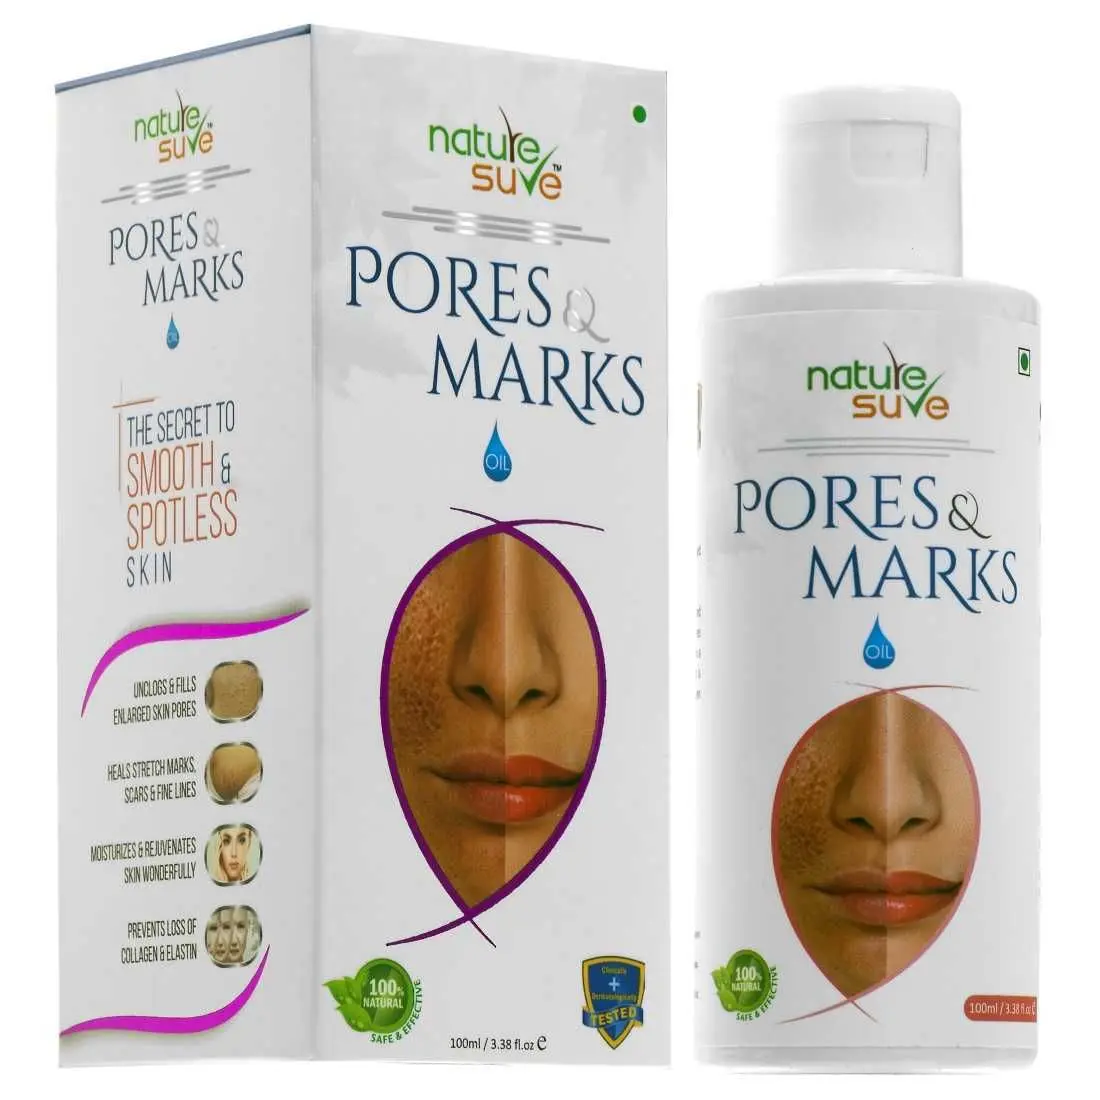 Nature Sure Pores and Marks Oil for Enlarged Pores and Stretch Marks in Men and Women - 1 Pack (100 ml)